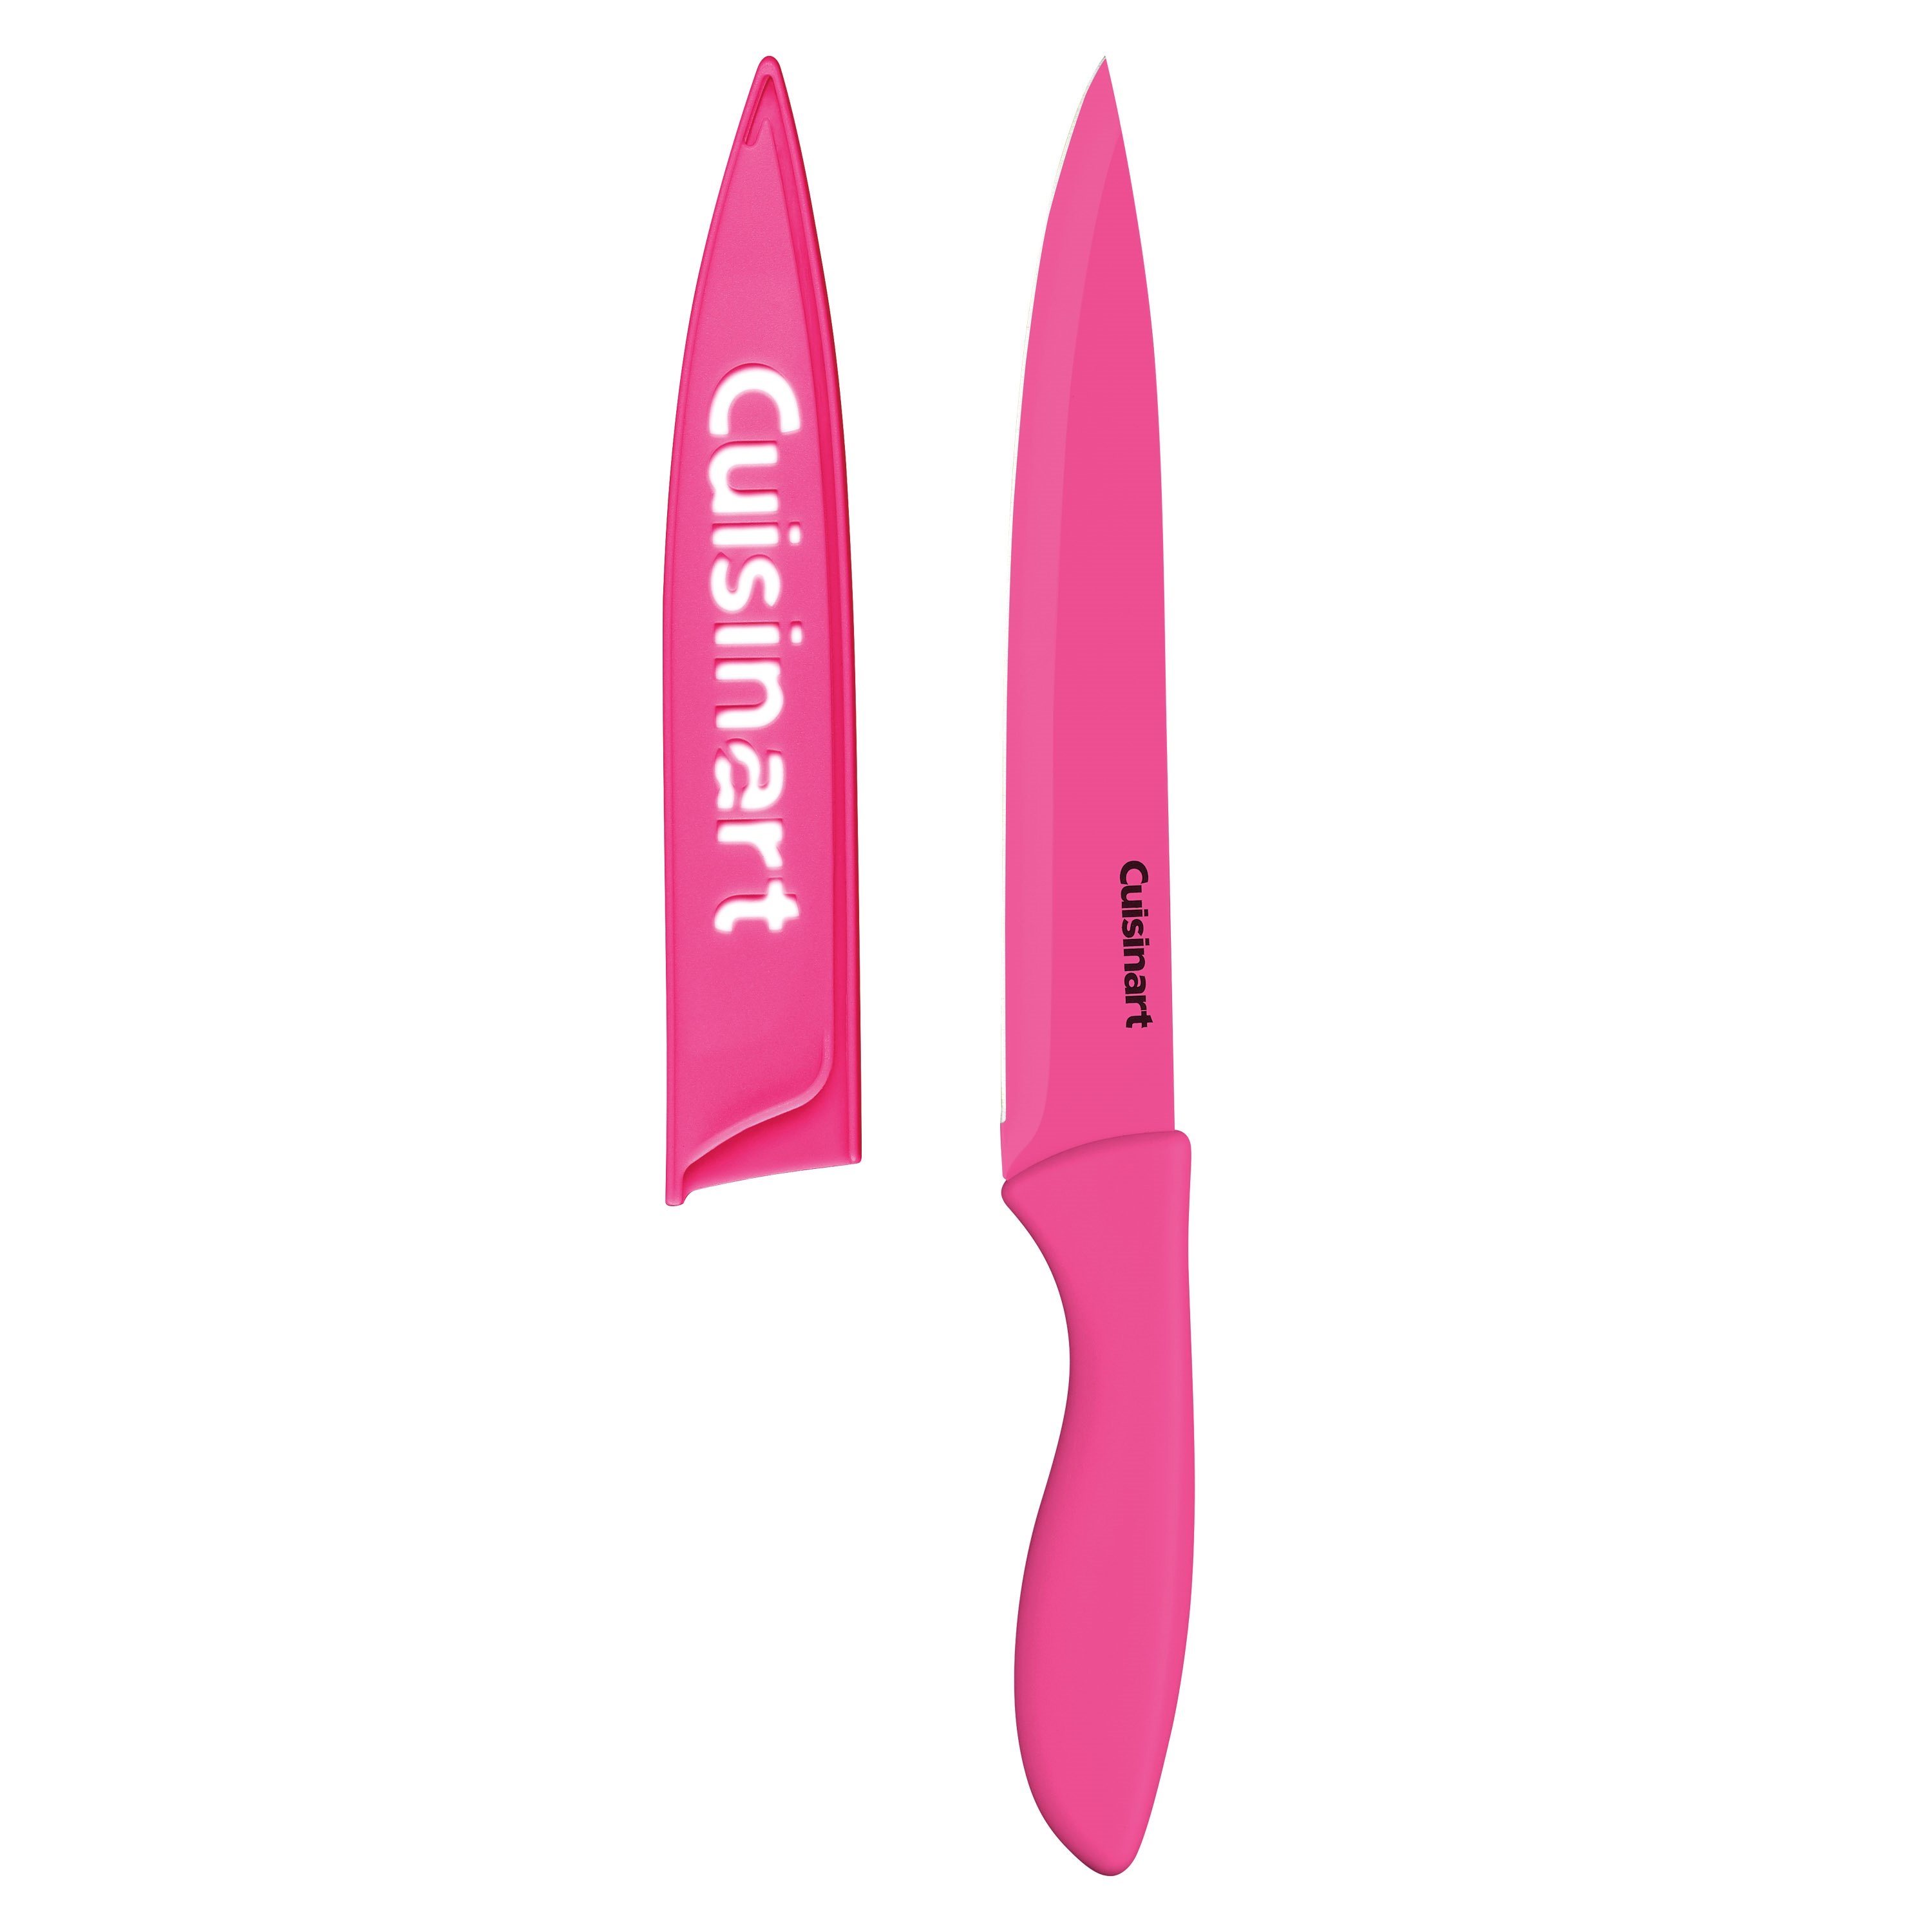 Cuisinart Advantage 12-Piece Ceramic Coated Knife Set w/Blade Guards NEW IN  BOX!